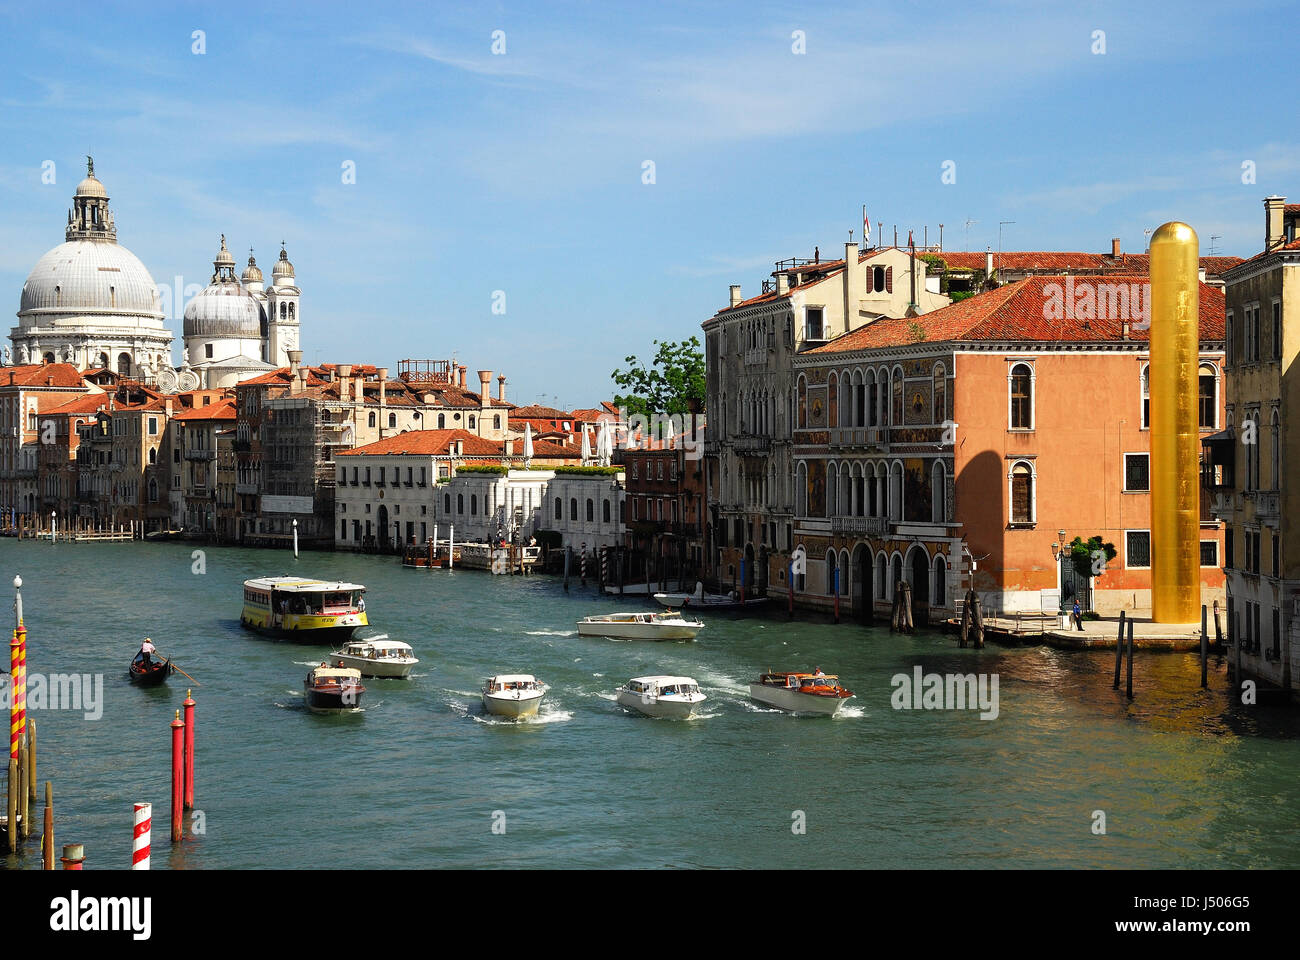 Venice, May 14th, 2017. The 57th Venice Biennale of Contemporary Art opened yesterday. Visitors from all the world crowd the pavilions. Campo San Vio, title : The Golden Tower by James Lee Byars. Credit: Ferdinando Piezzi/Alamy Live News Stock Photo